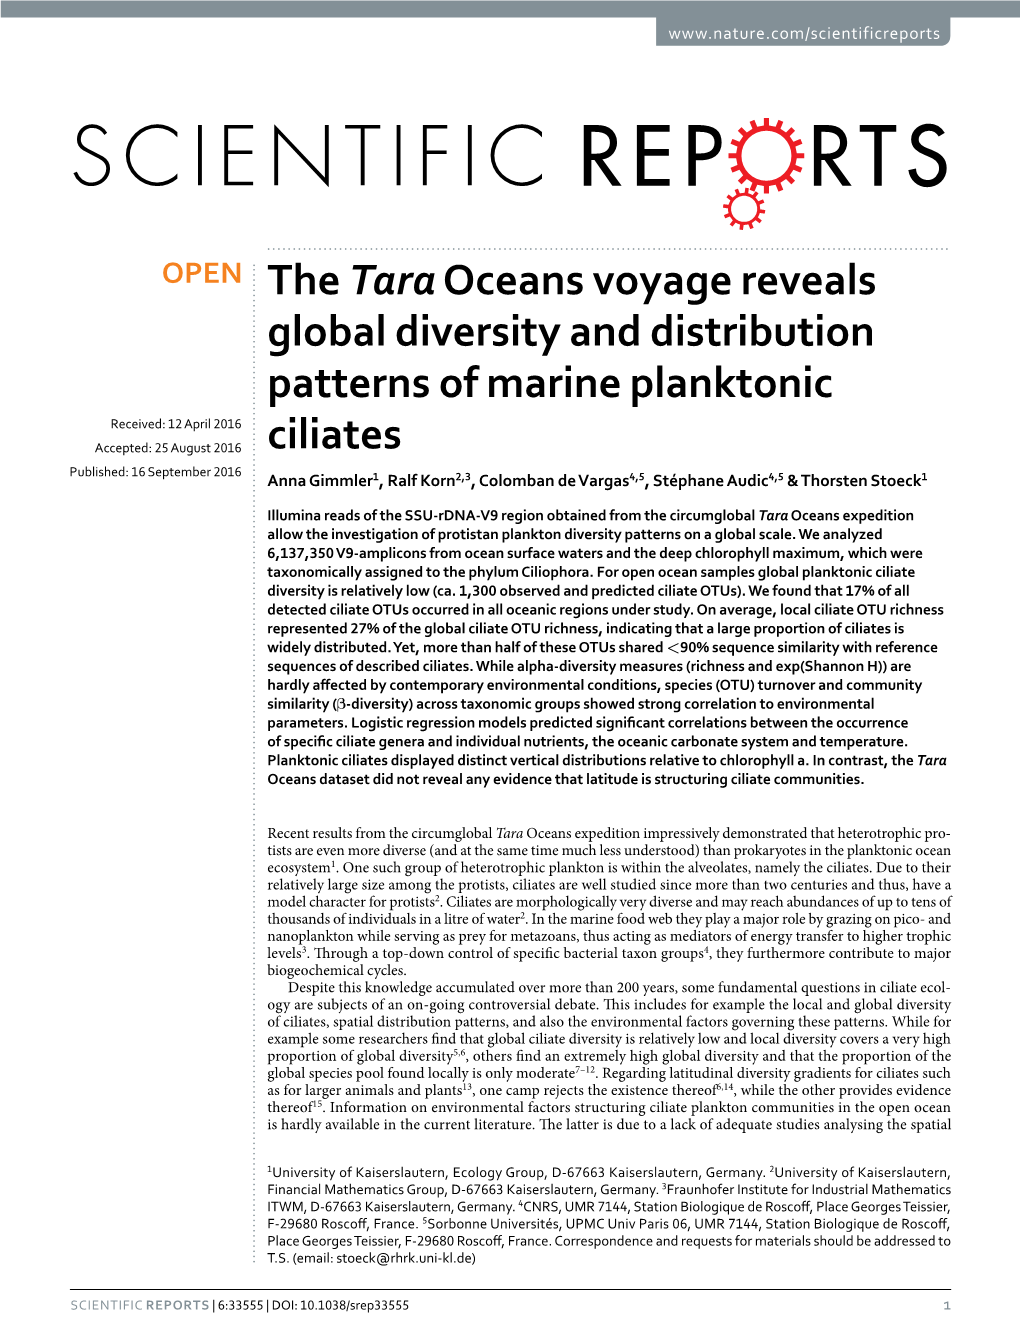 The Tara Oceans Voyage Reveals Global Diversity and Distribution